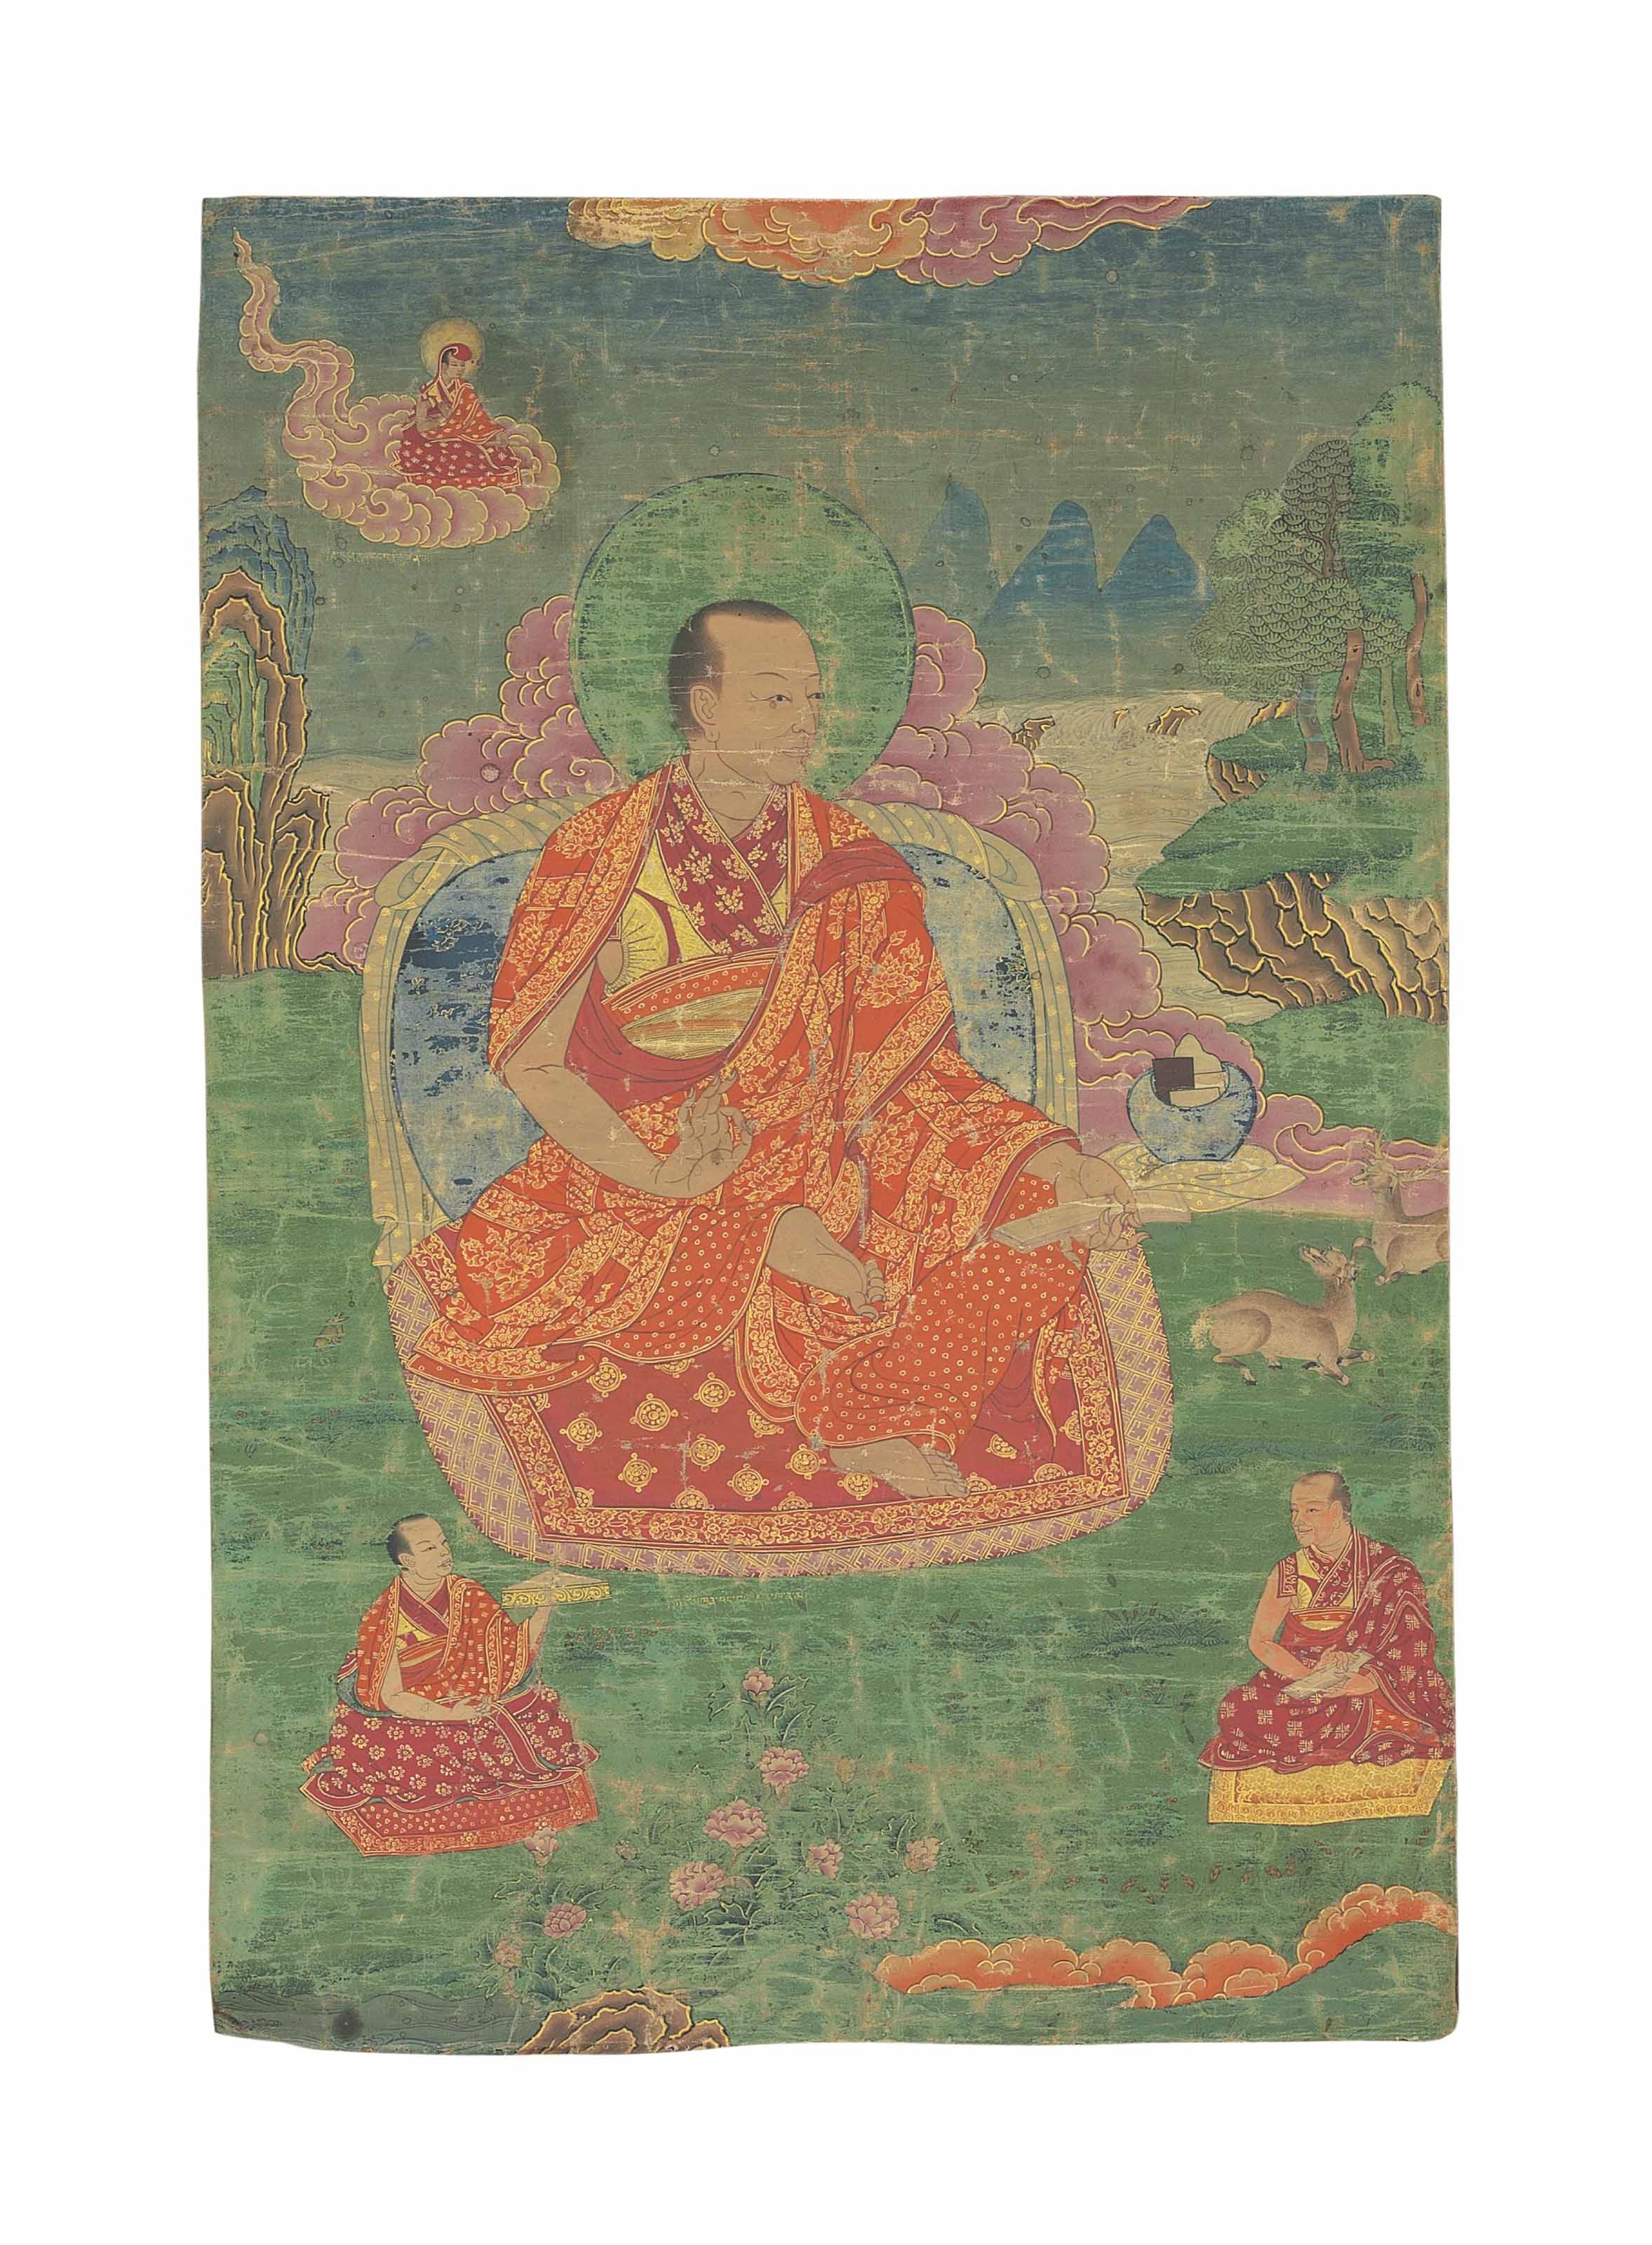 A painting of Jamyang Dewa'I Dorje by Tibetan School, 18th Century, 18th/19th century